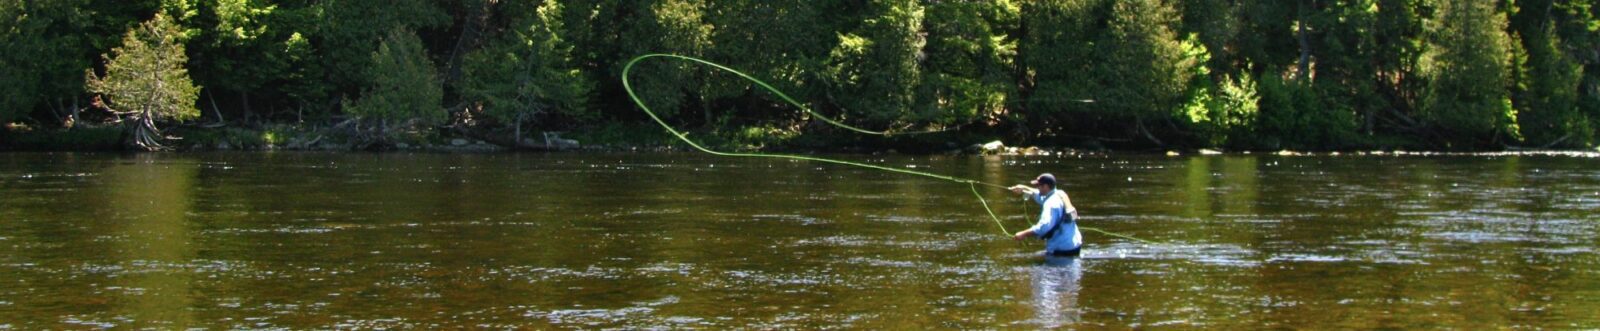 Fly Fishing University - Maine Guide Fly Shop and Guide Service